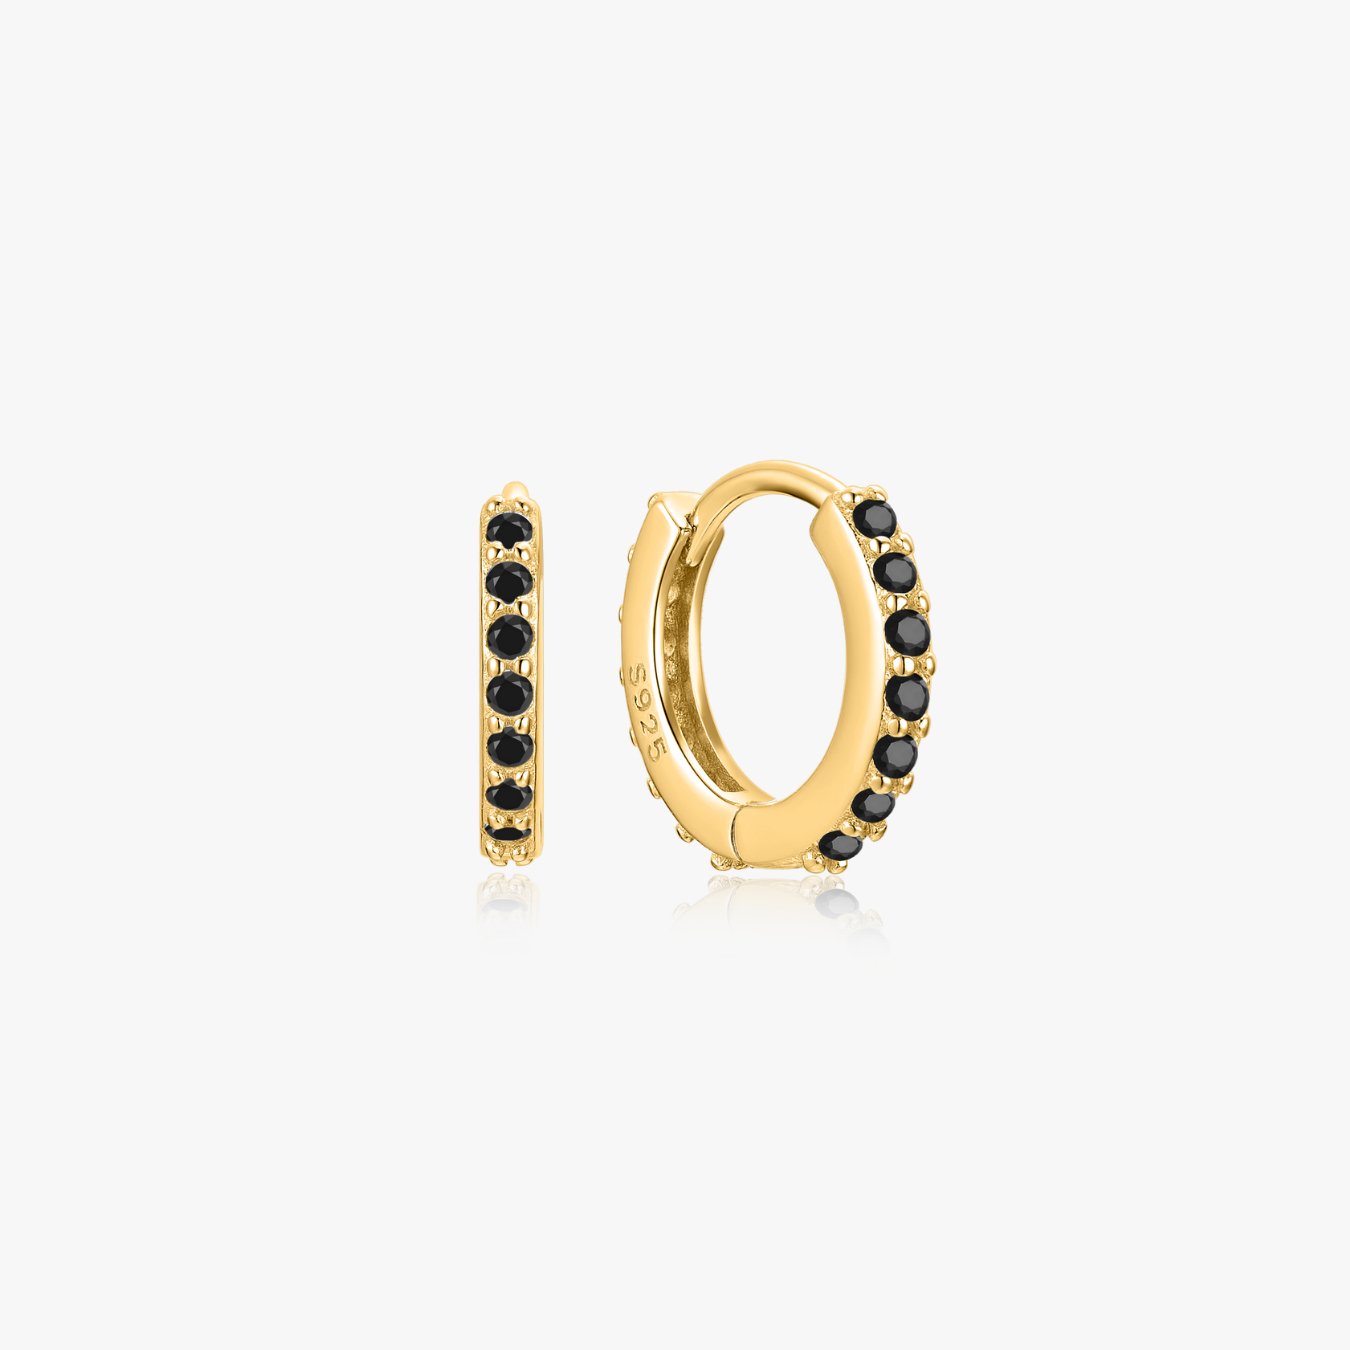 Black Gem Huggies in Gold - Flaire & Co.